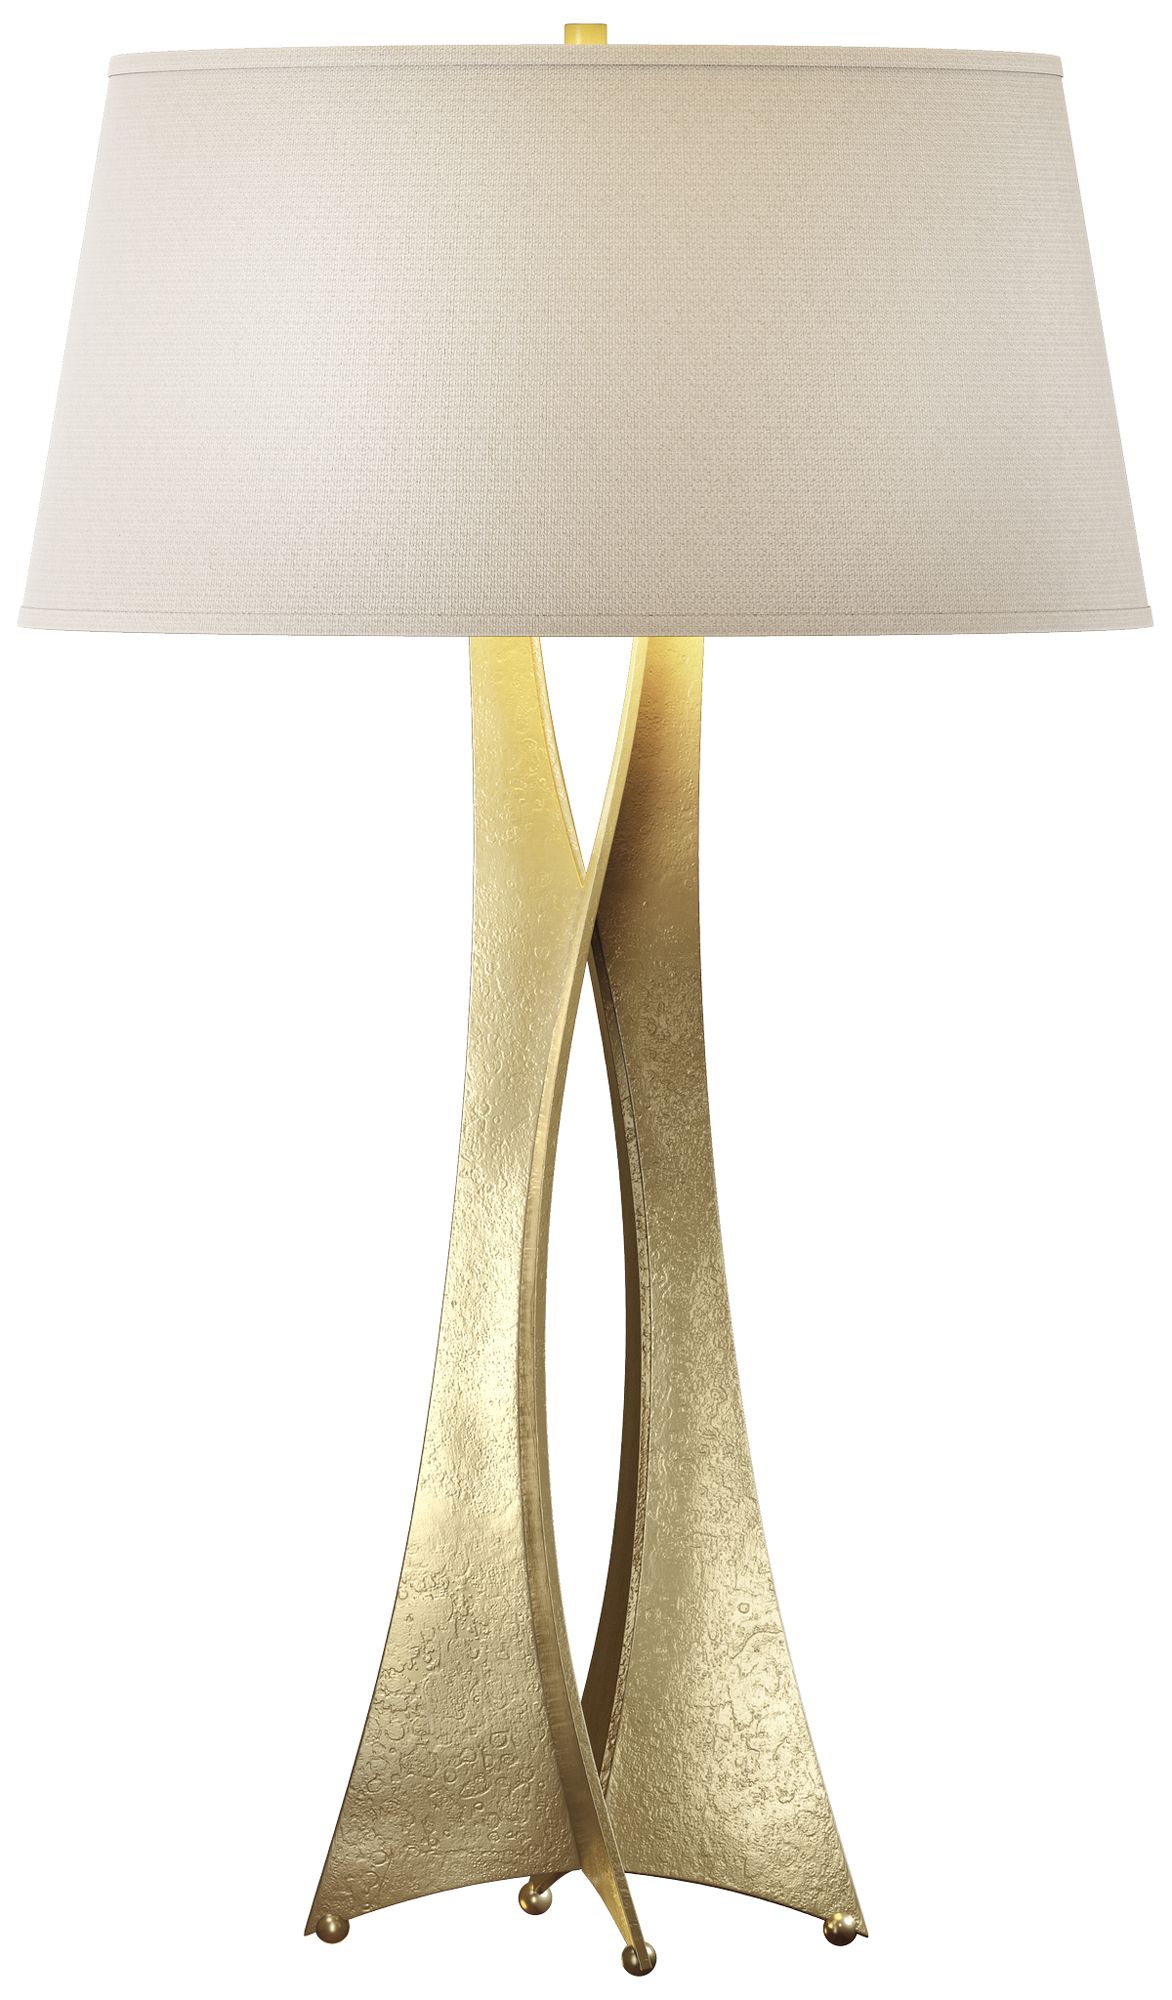 Moreau 33.4"H Tall Modern Brass Table Lamp With Natural Linen Shade